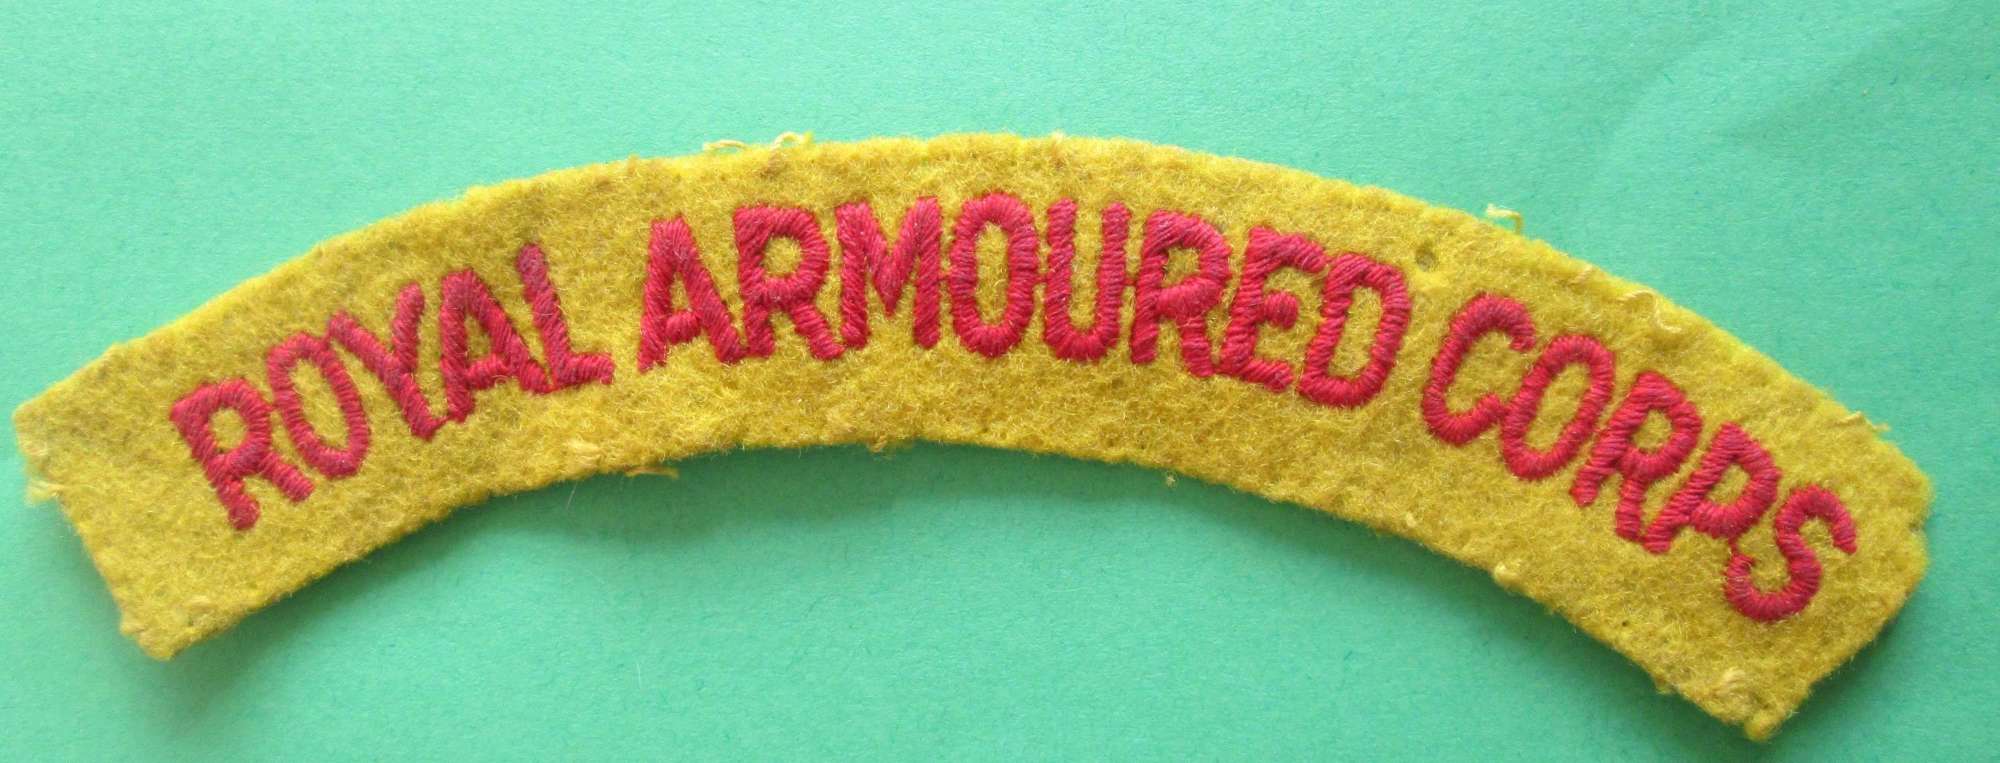 ROYAL ARMOURED CORPS SHOULDER TITLE